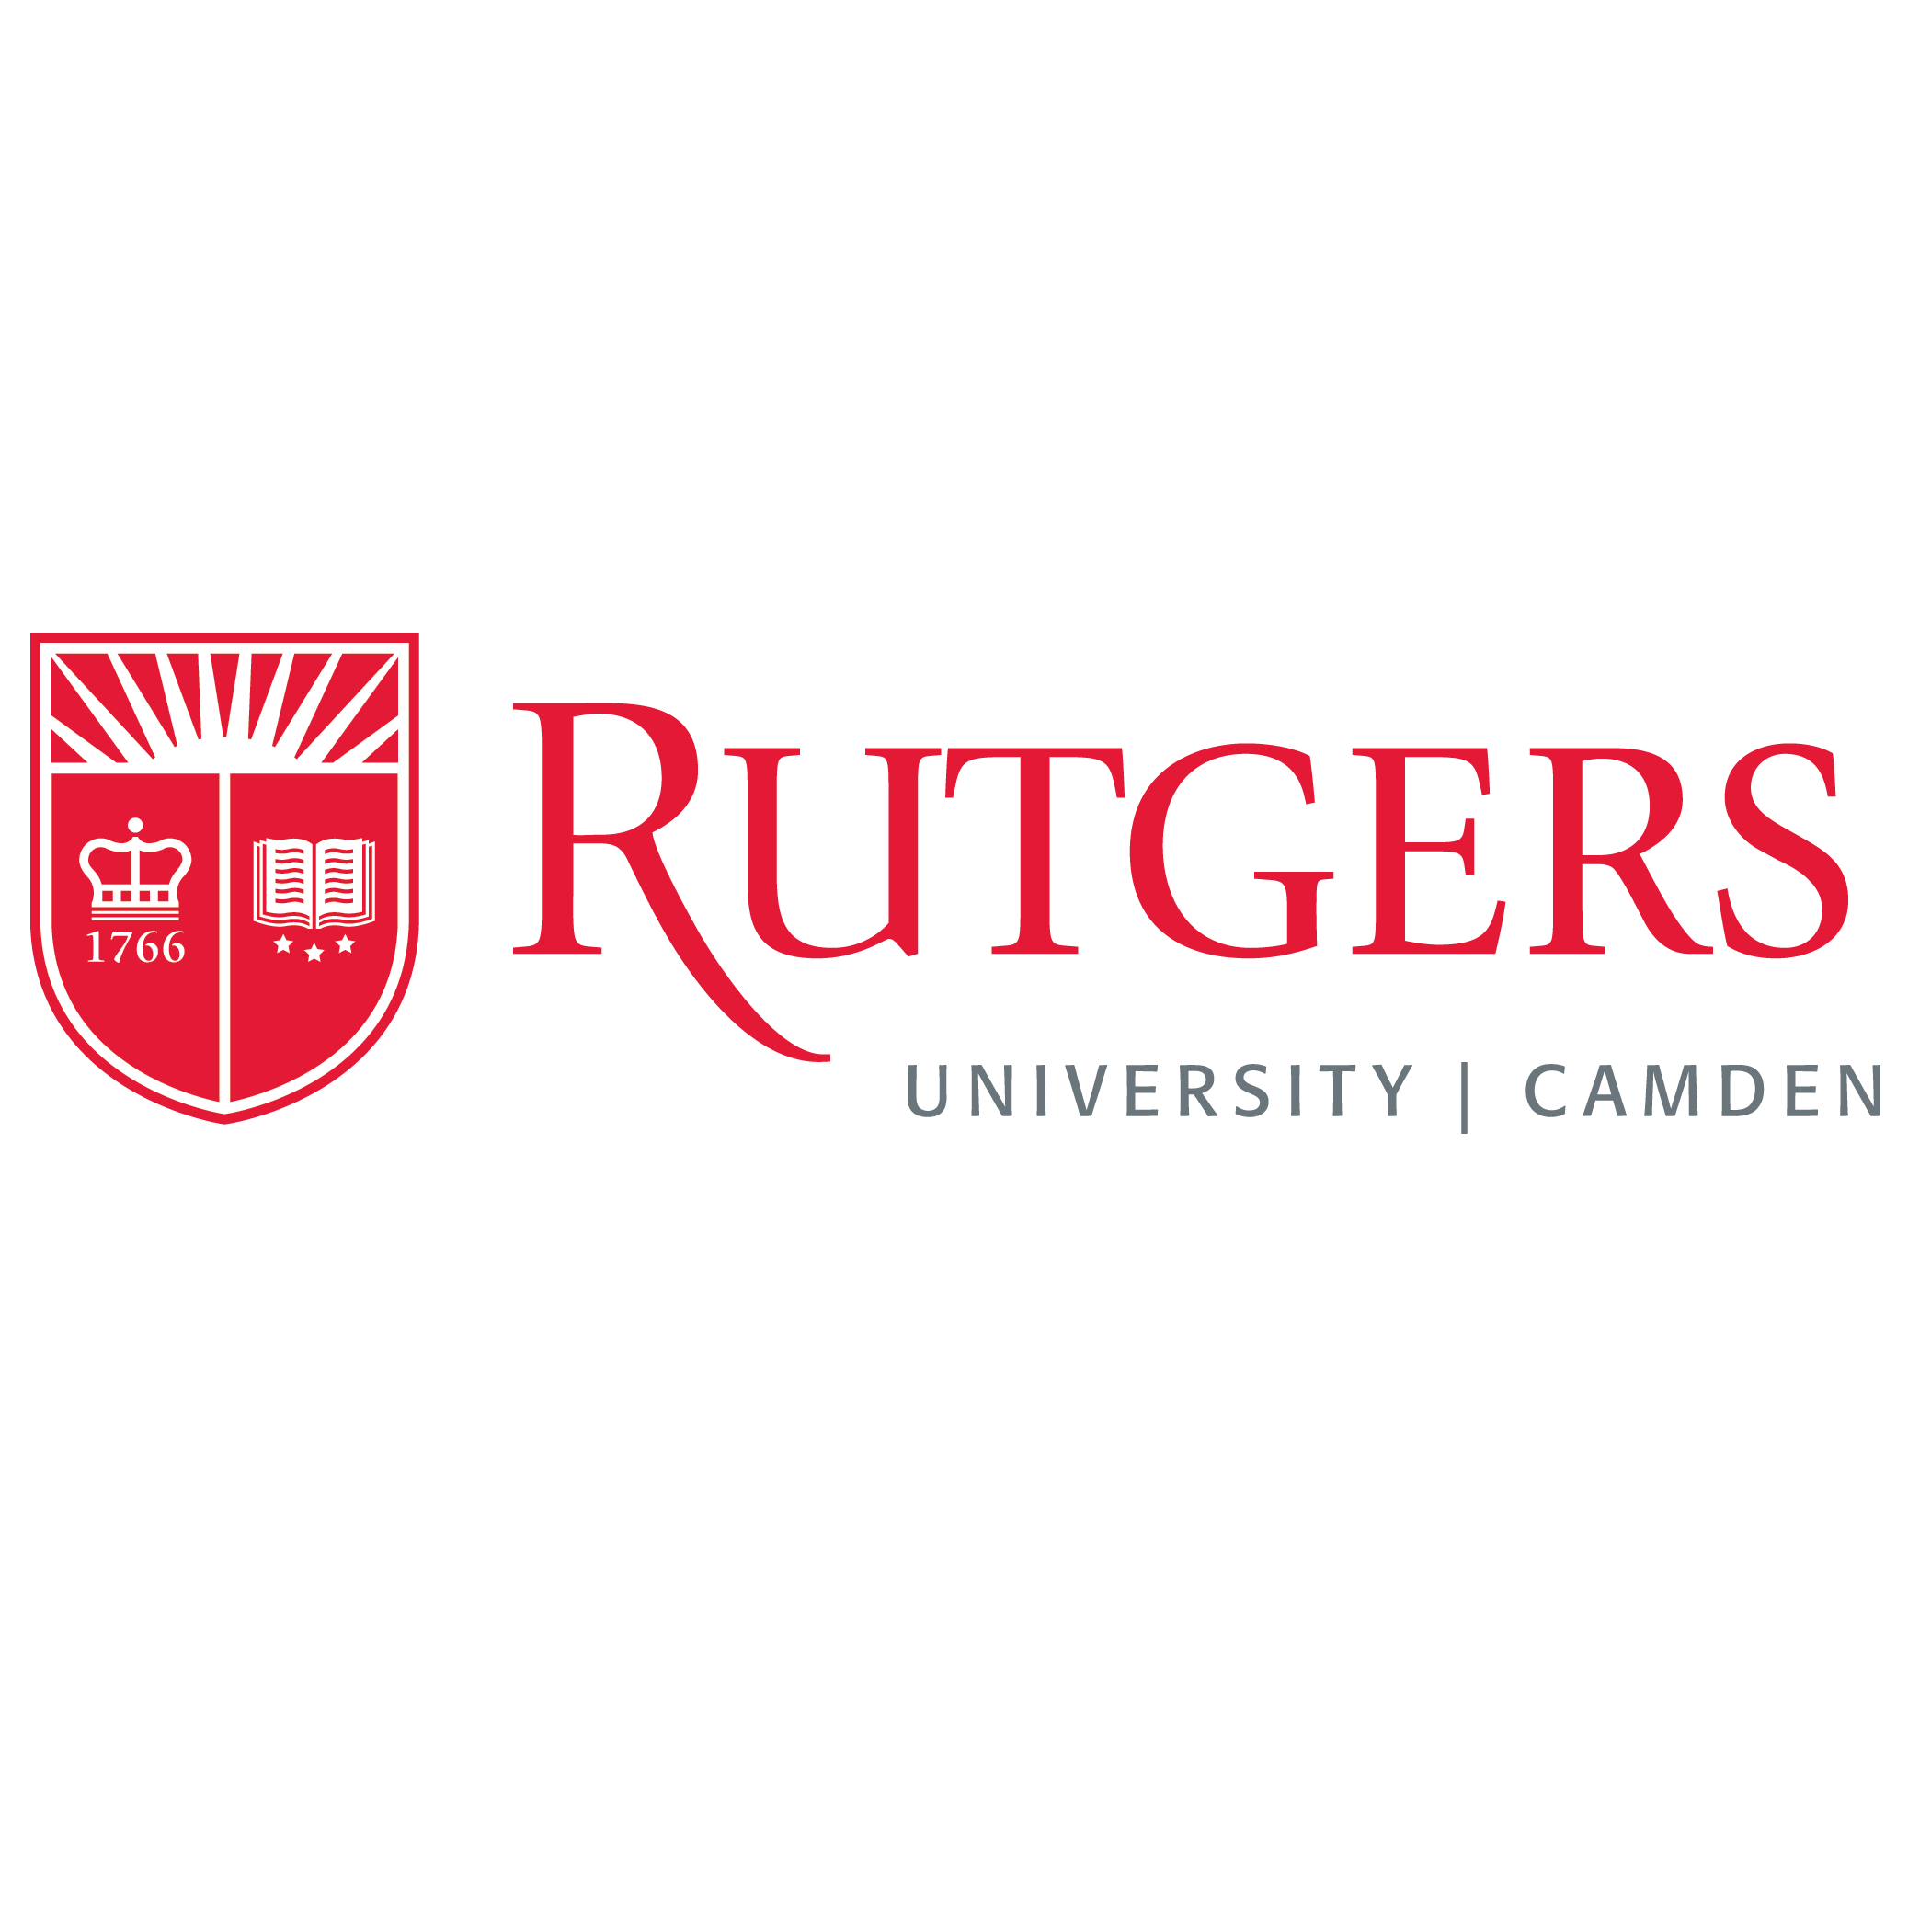 Rutgers, The State University of New Jersey – Camden